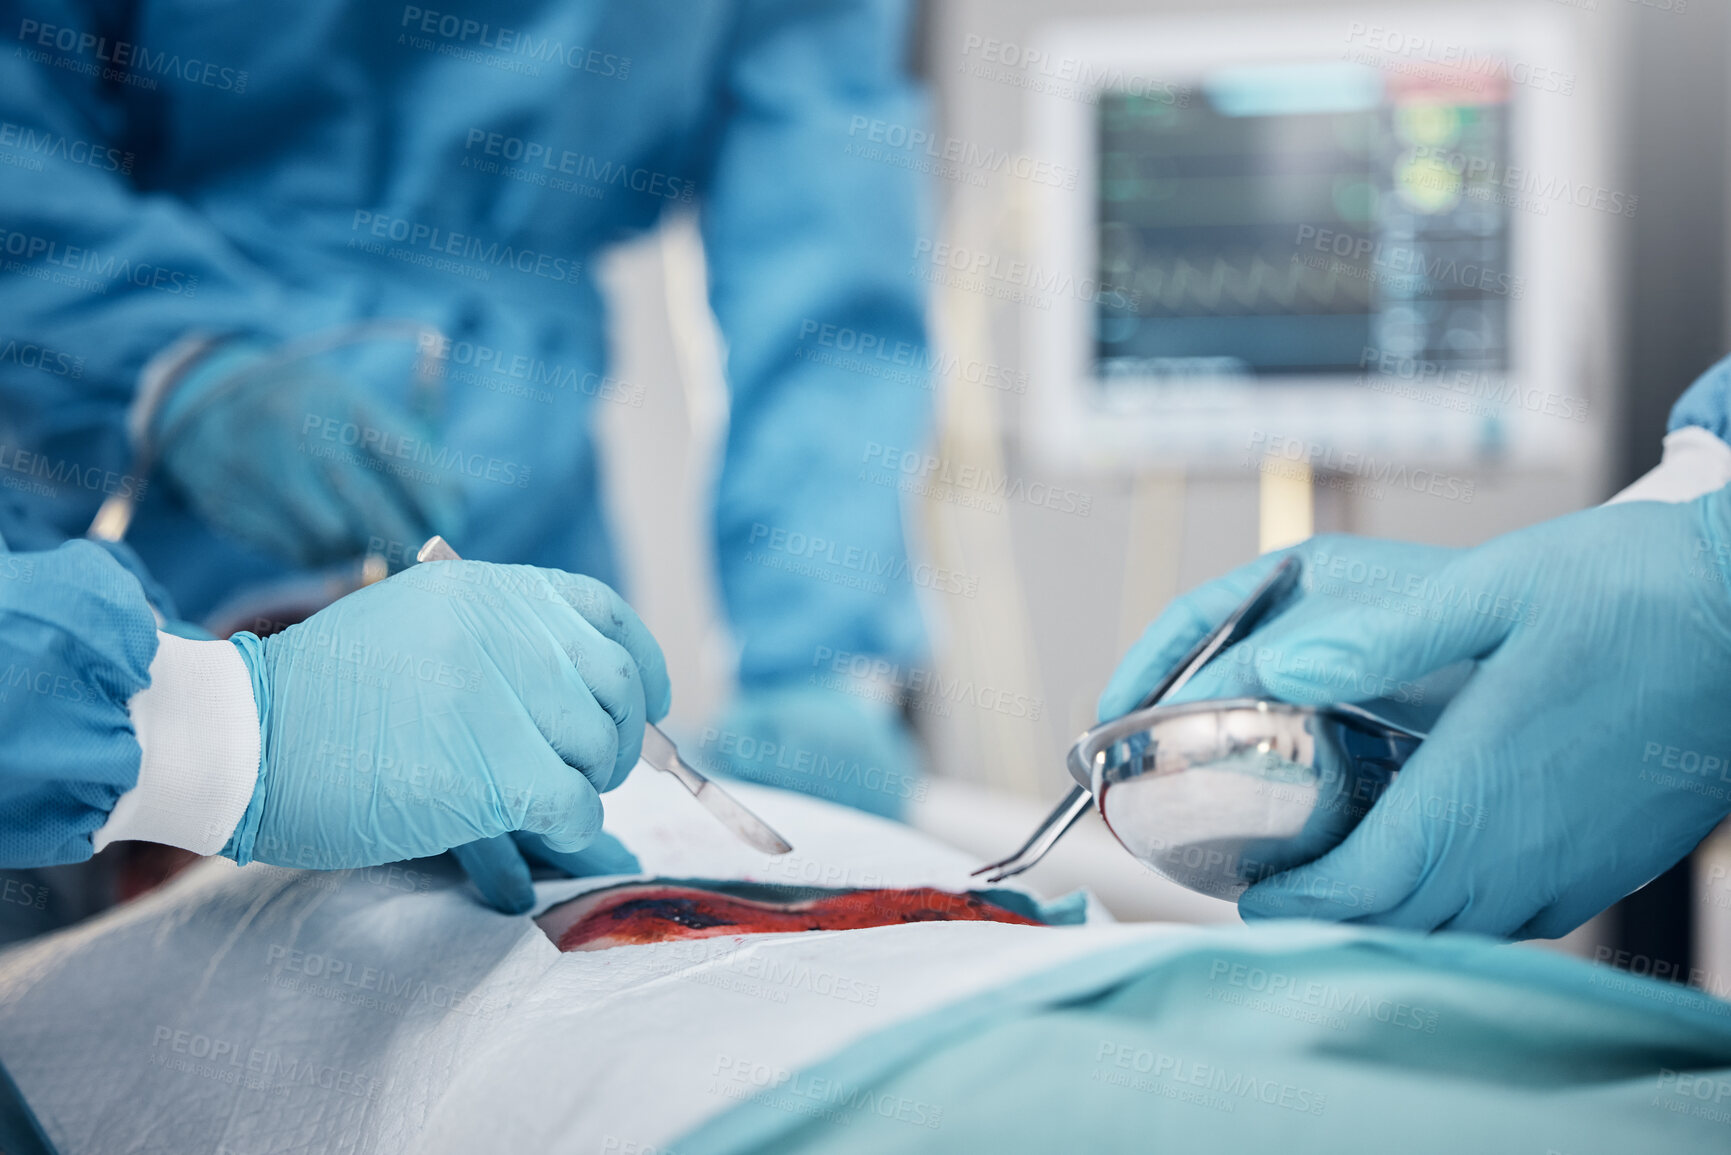 Buy stock photo Hands, blood and operation with a team of doctors at work during surgery with equipment or a tool in a hospital. Doctor, nurse and collaboration with a medicine professional group saving a life